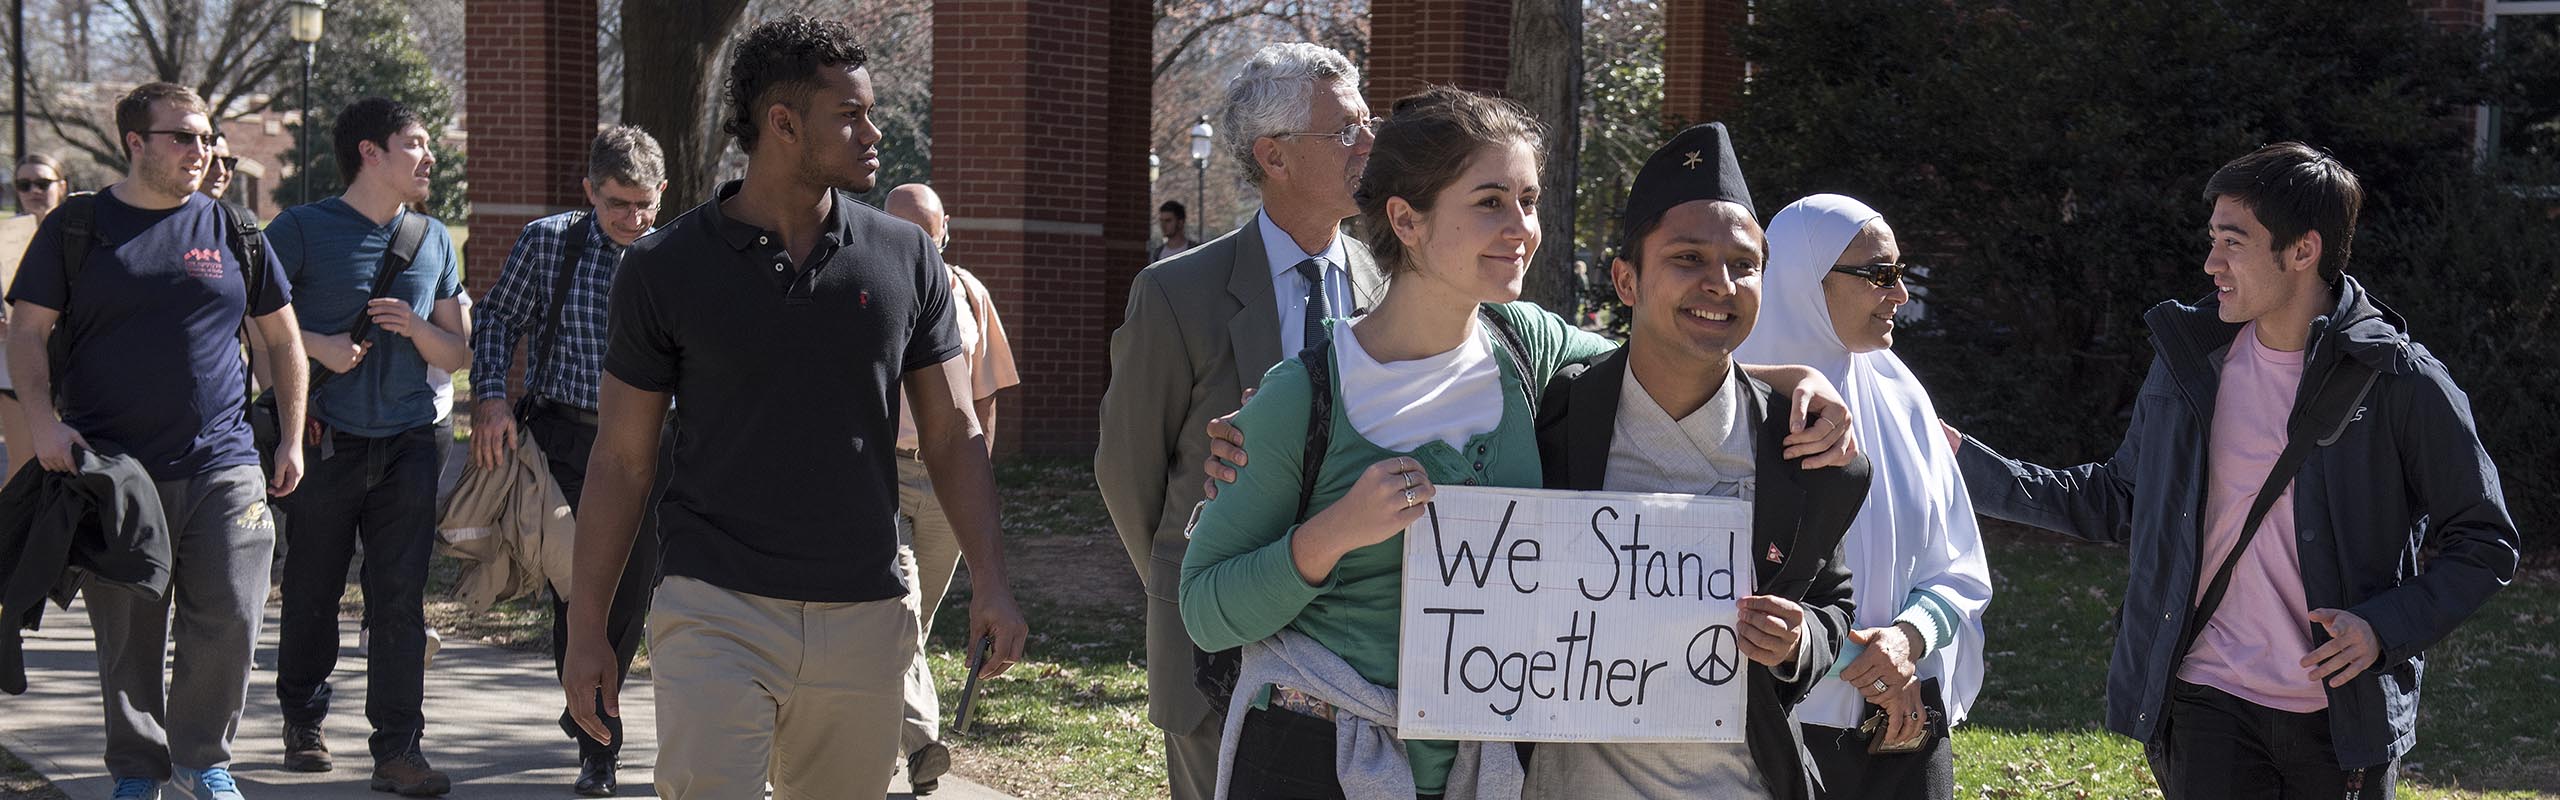 More than 100 students, faculty and staff gathered at Elon’s Speakers' Corner on Young Commons to share their concerns and hold a march about the president’s recent Executive Order regarding immigration.